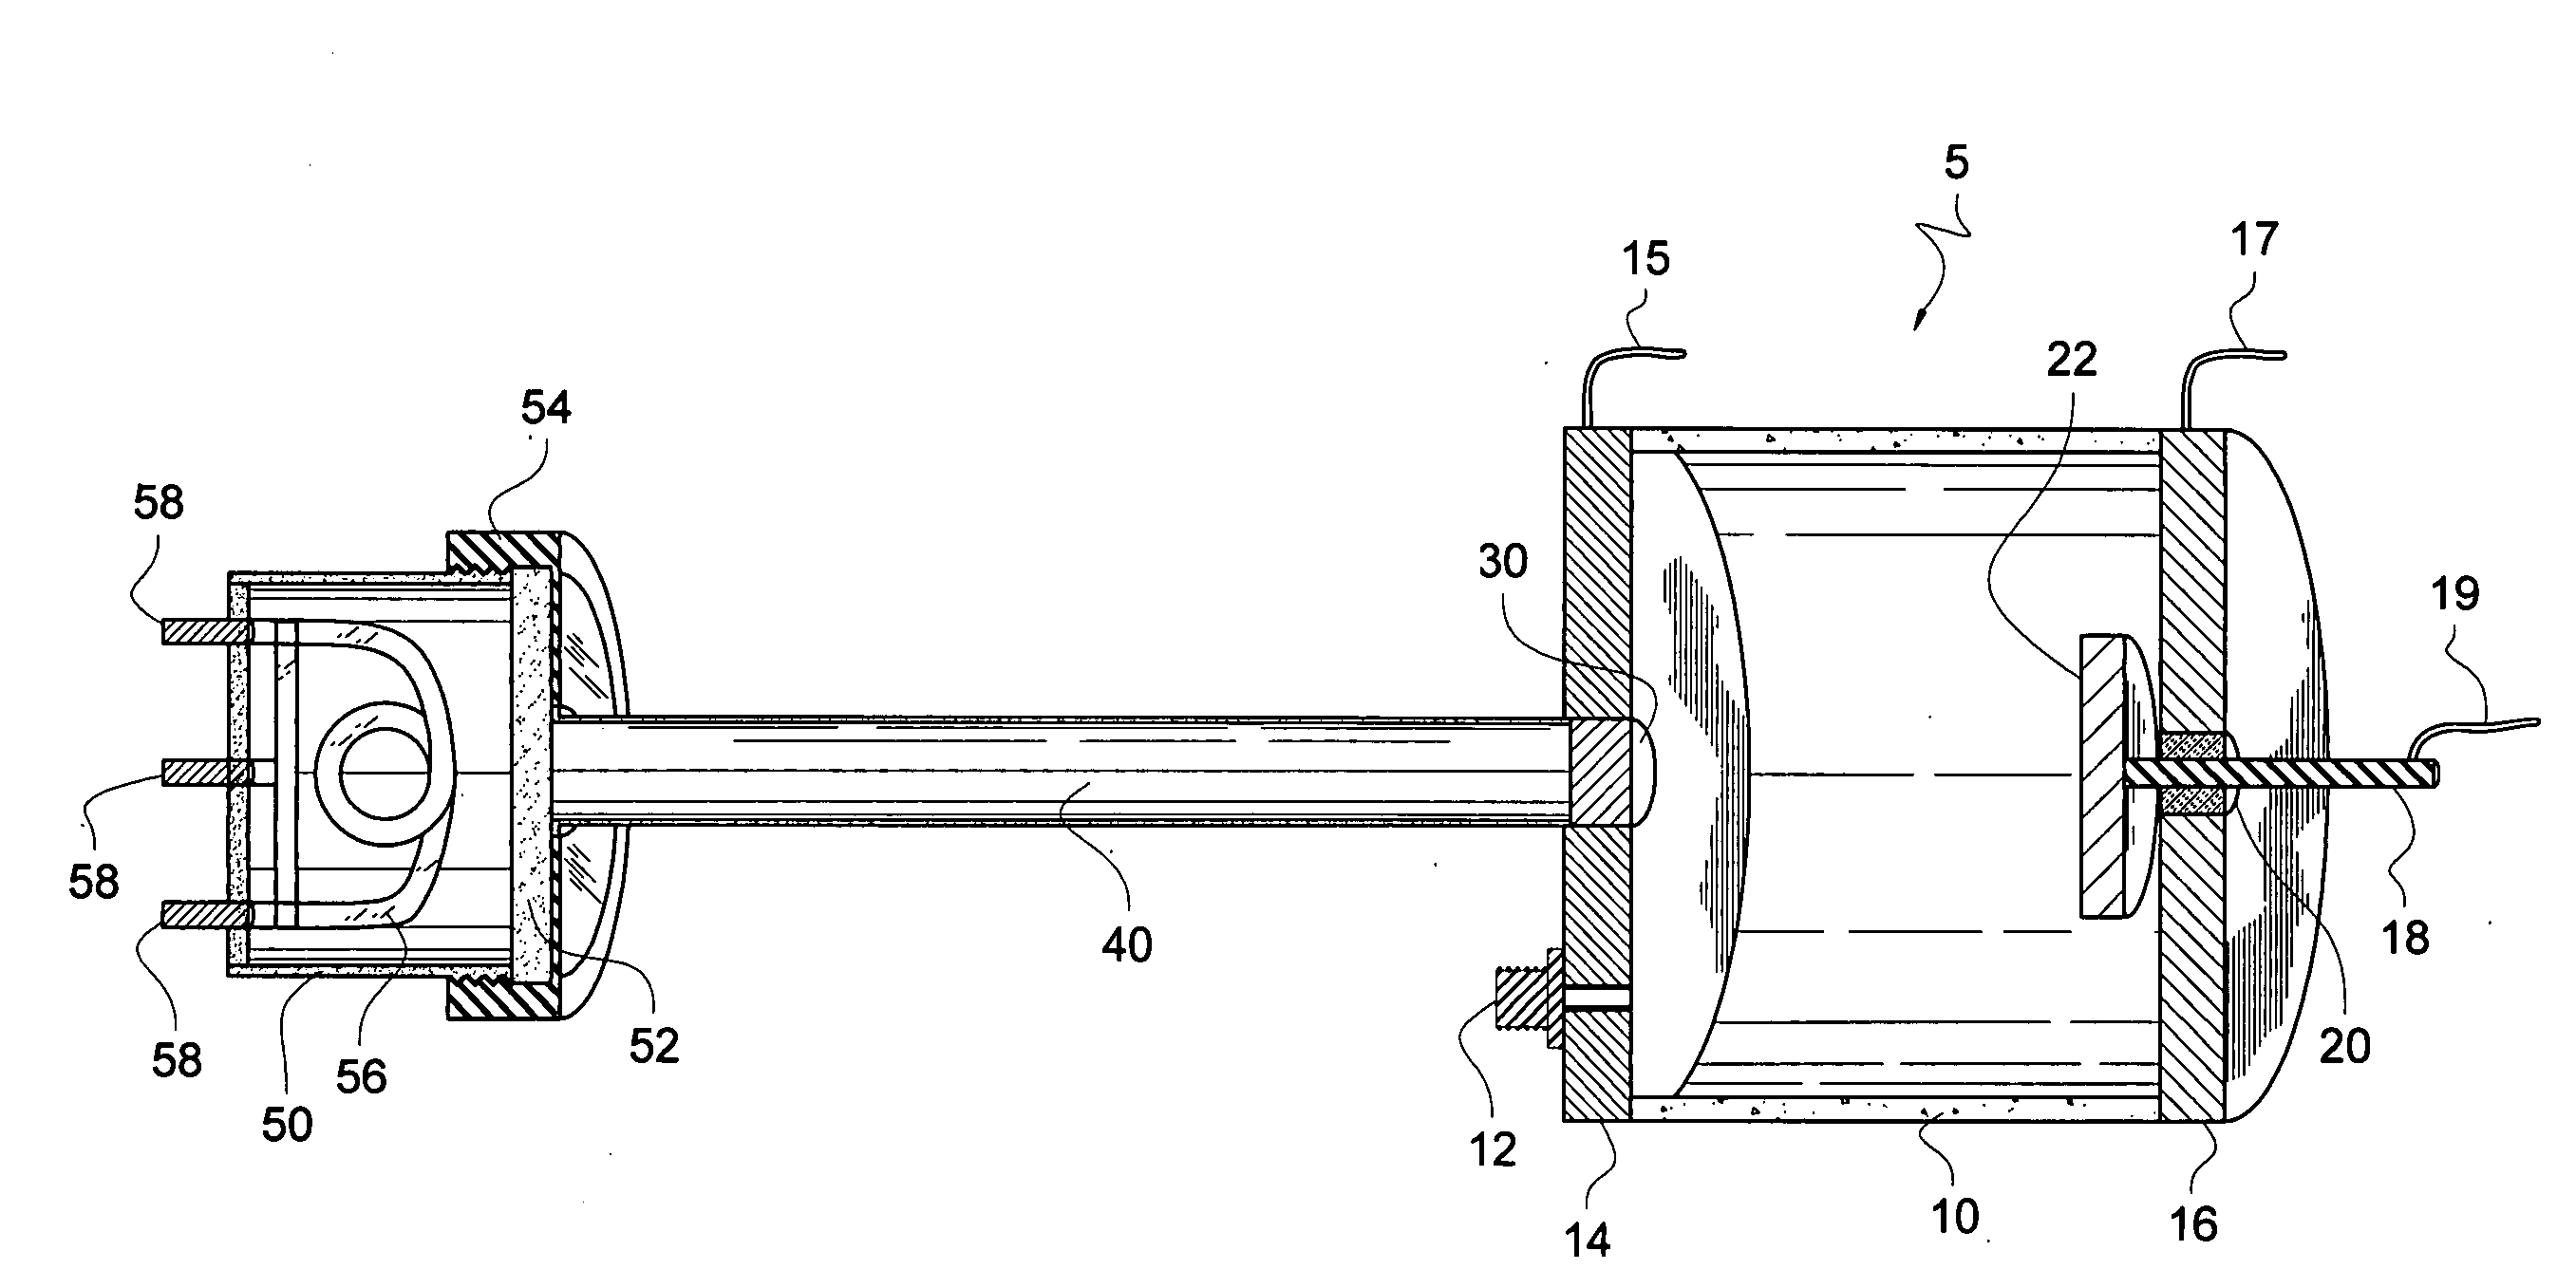 Method and apparatus for measuring purity of noble gases